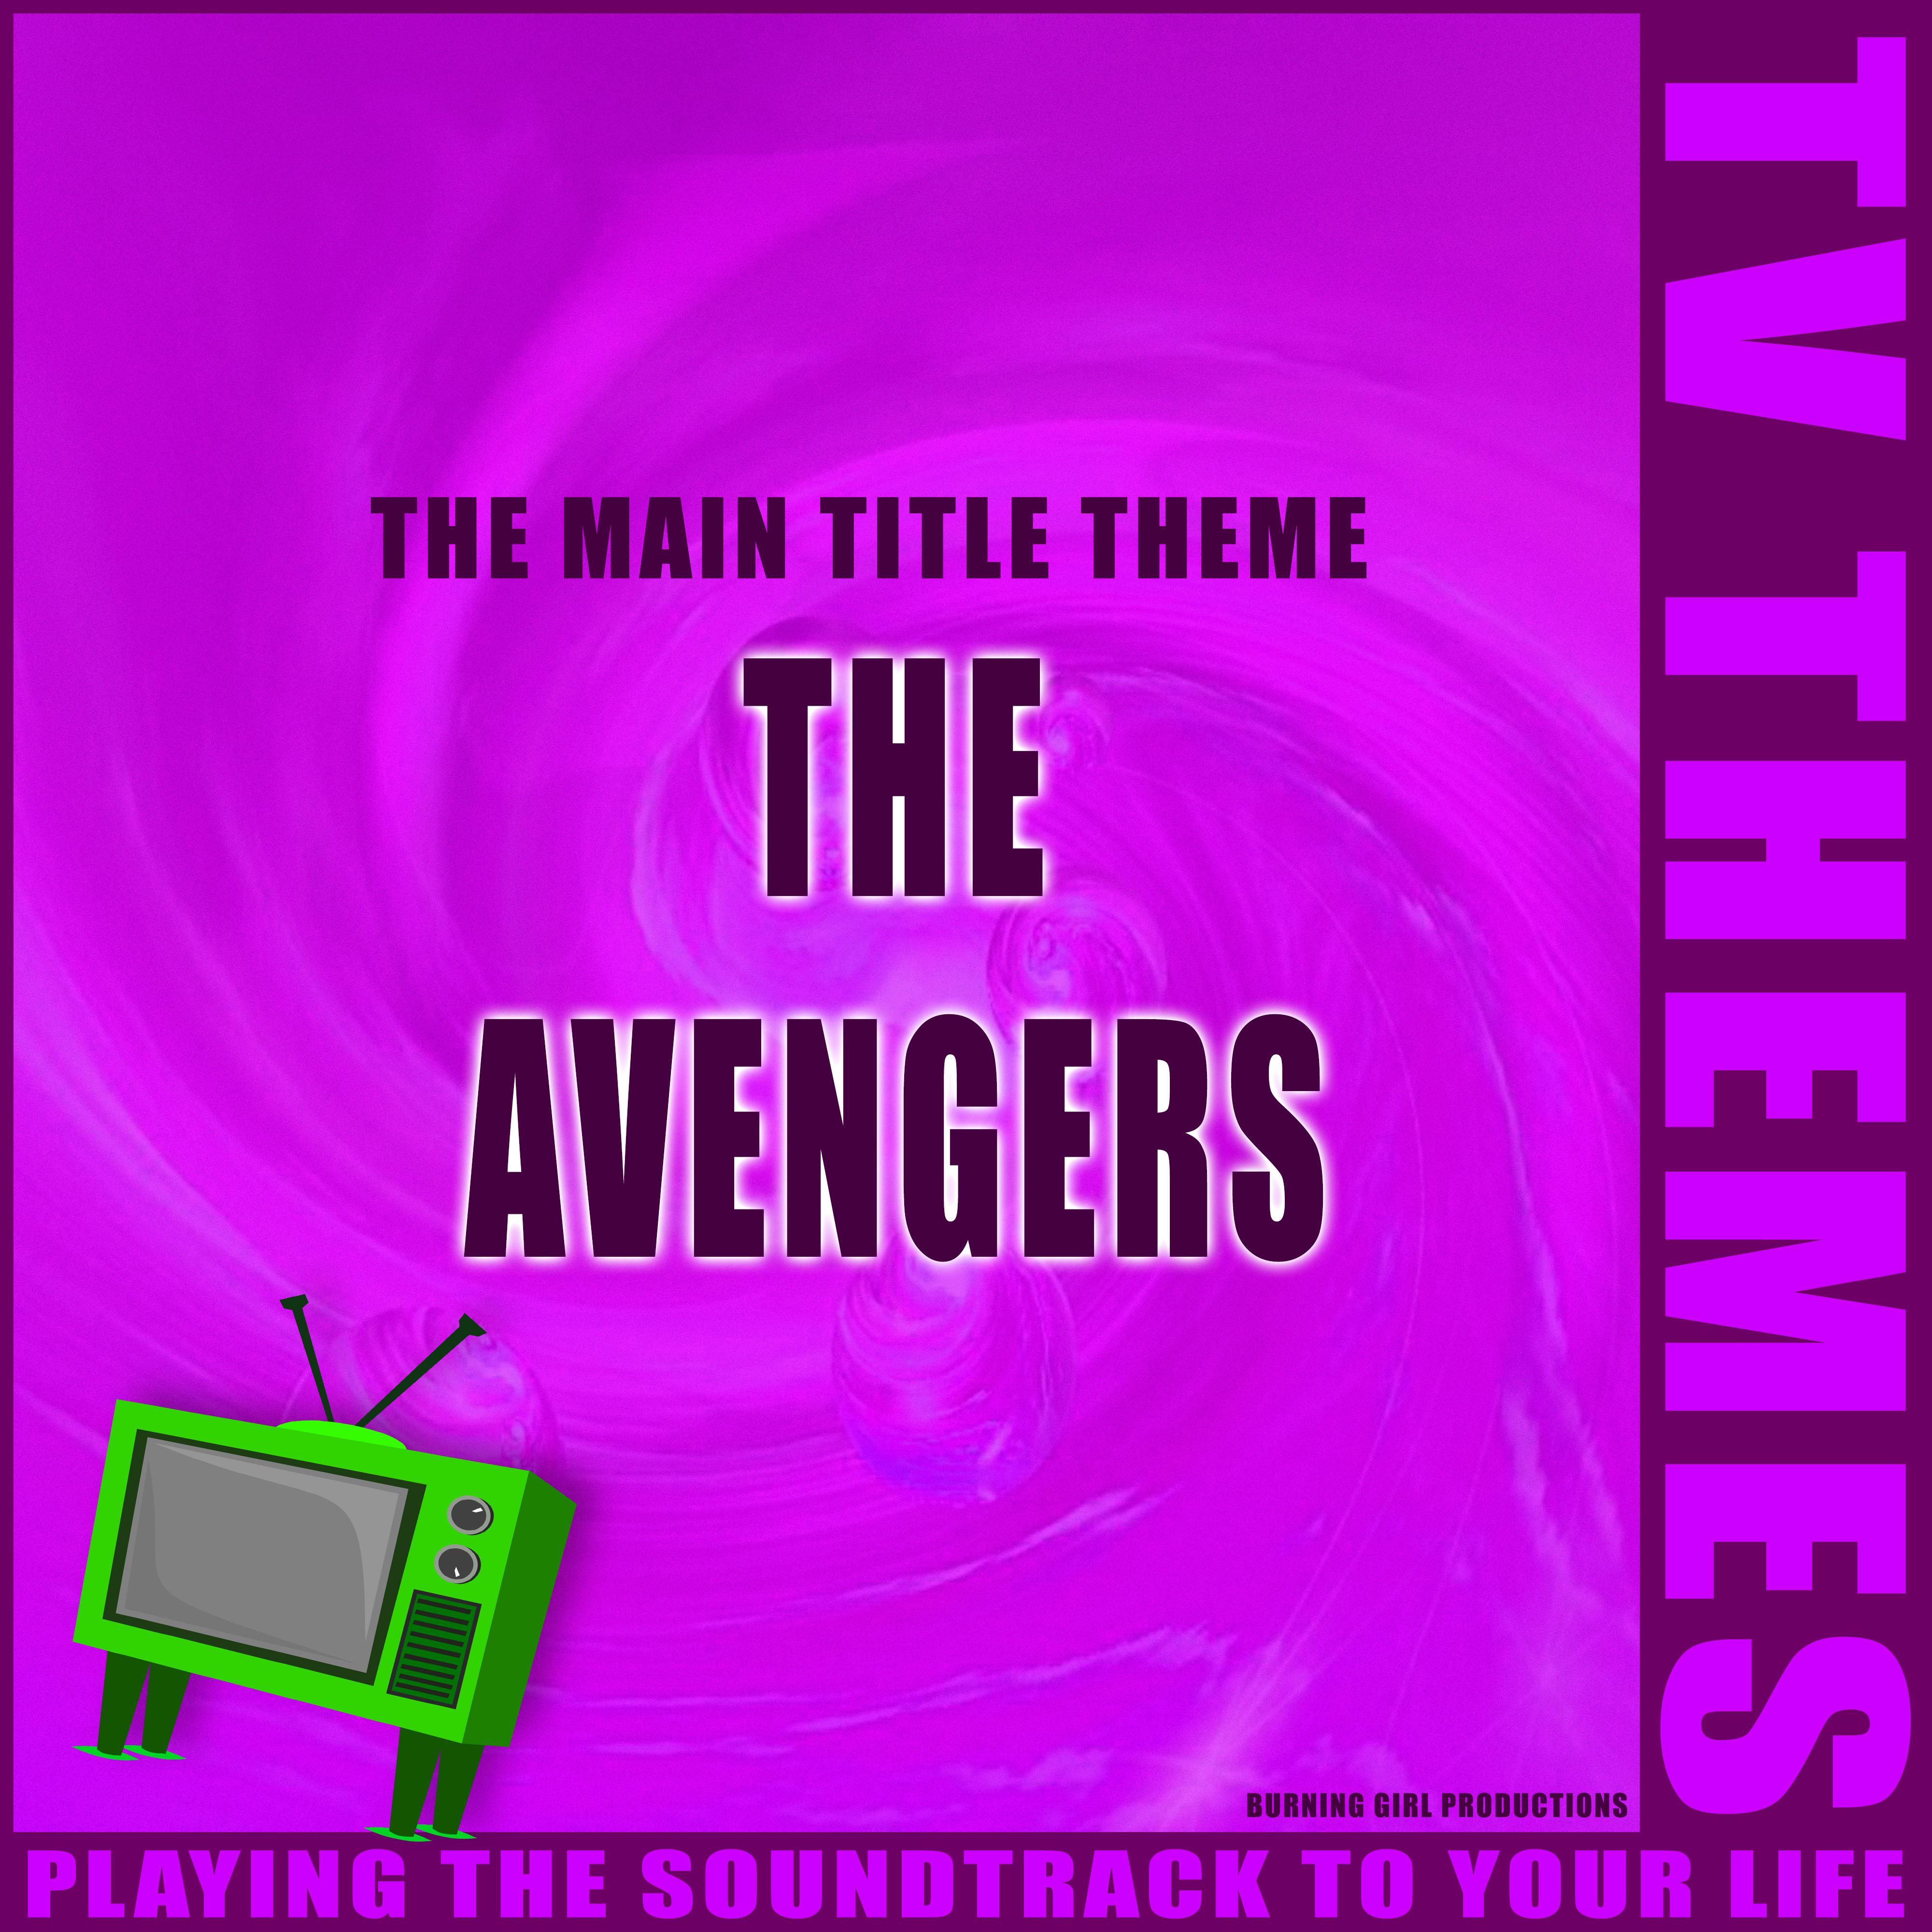 The Main Title Theme - The Avengers